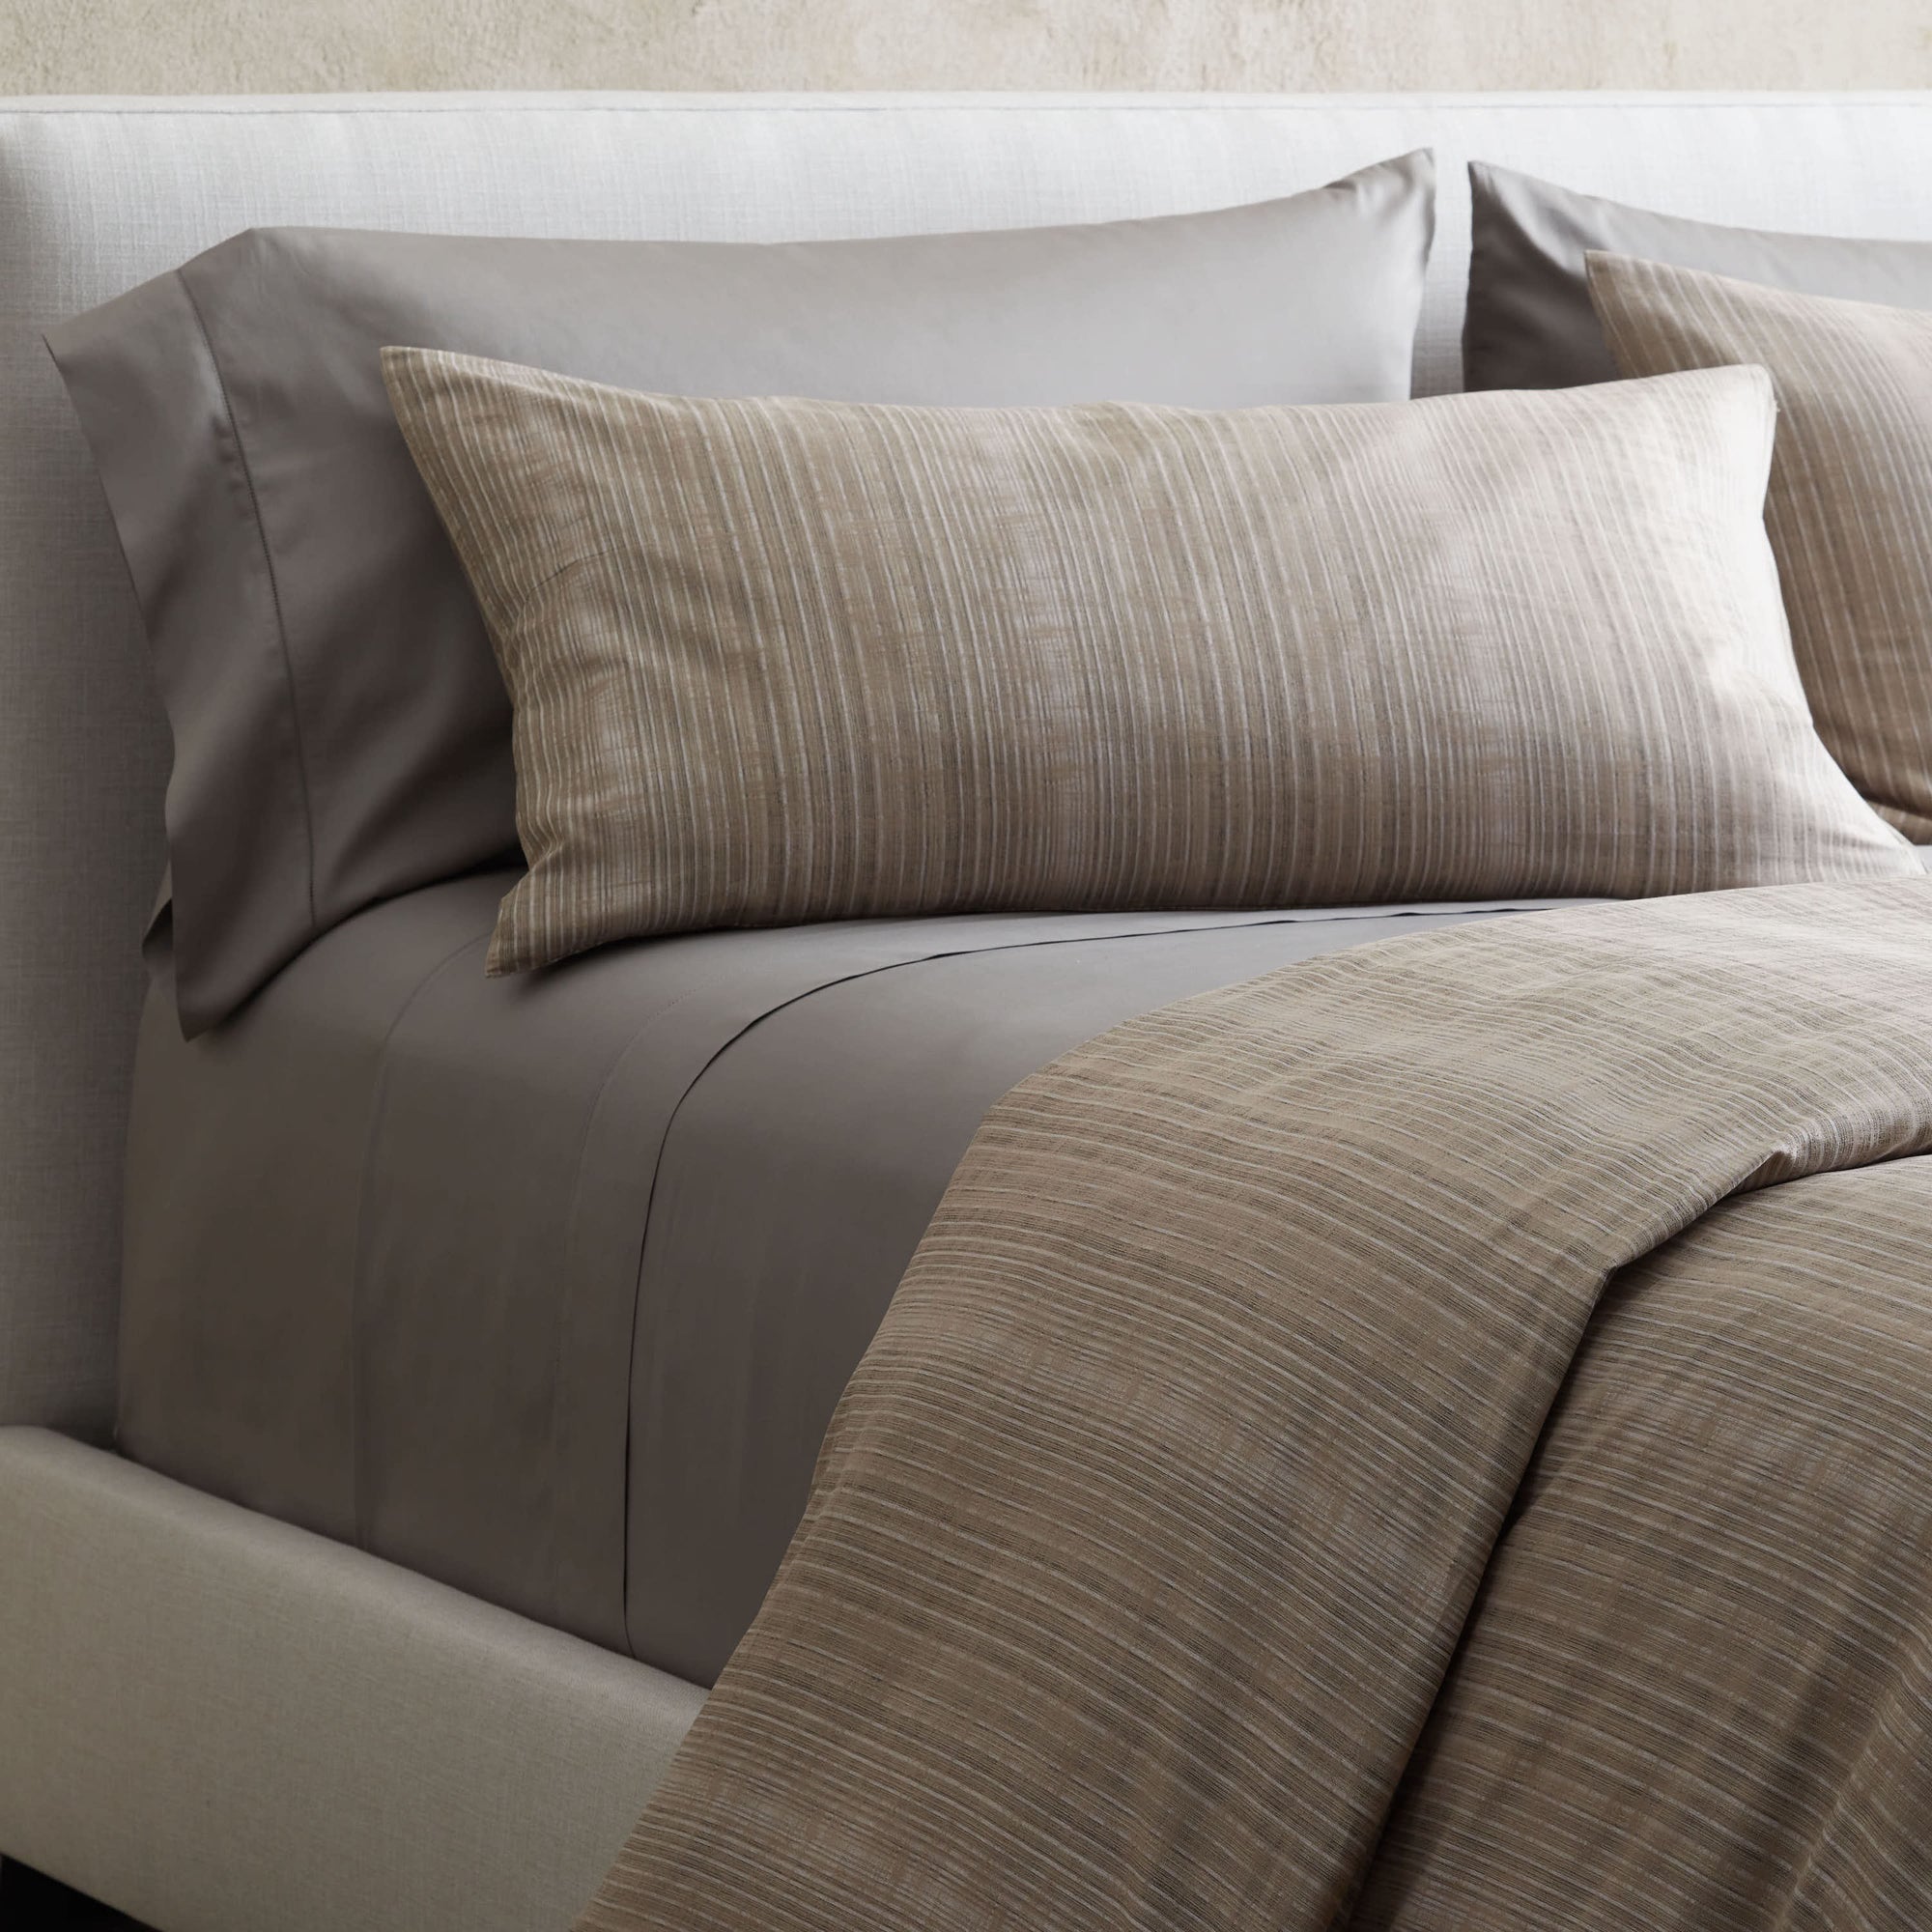 Made in Italy exclusively for Elte, the Renato Collection includes a 100% long staple cotton sateen a duvet cover and sham set.